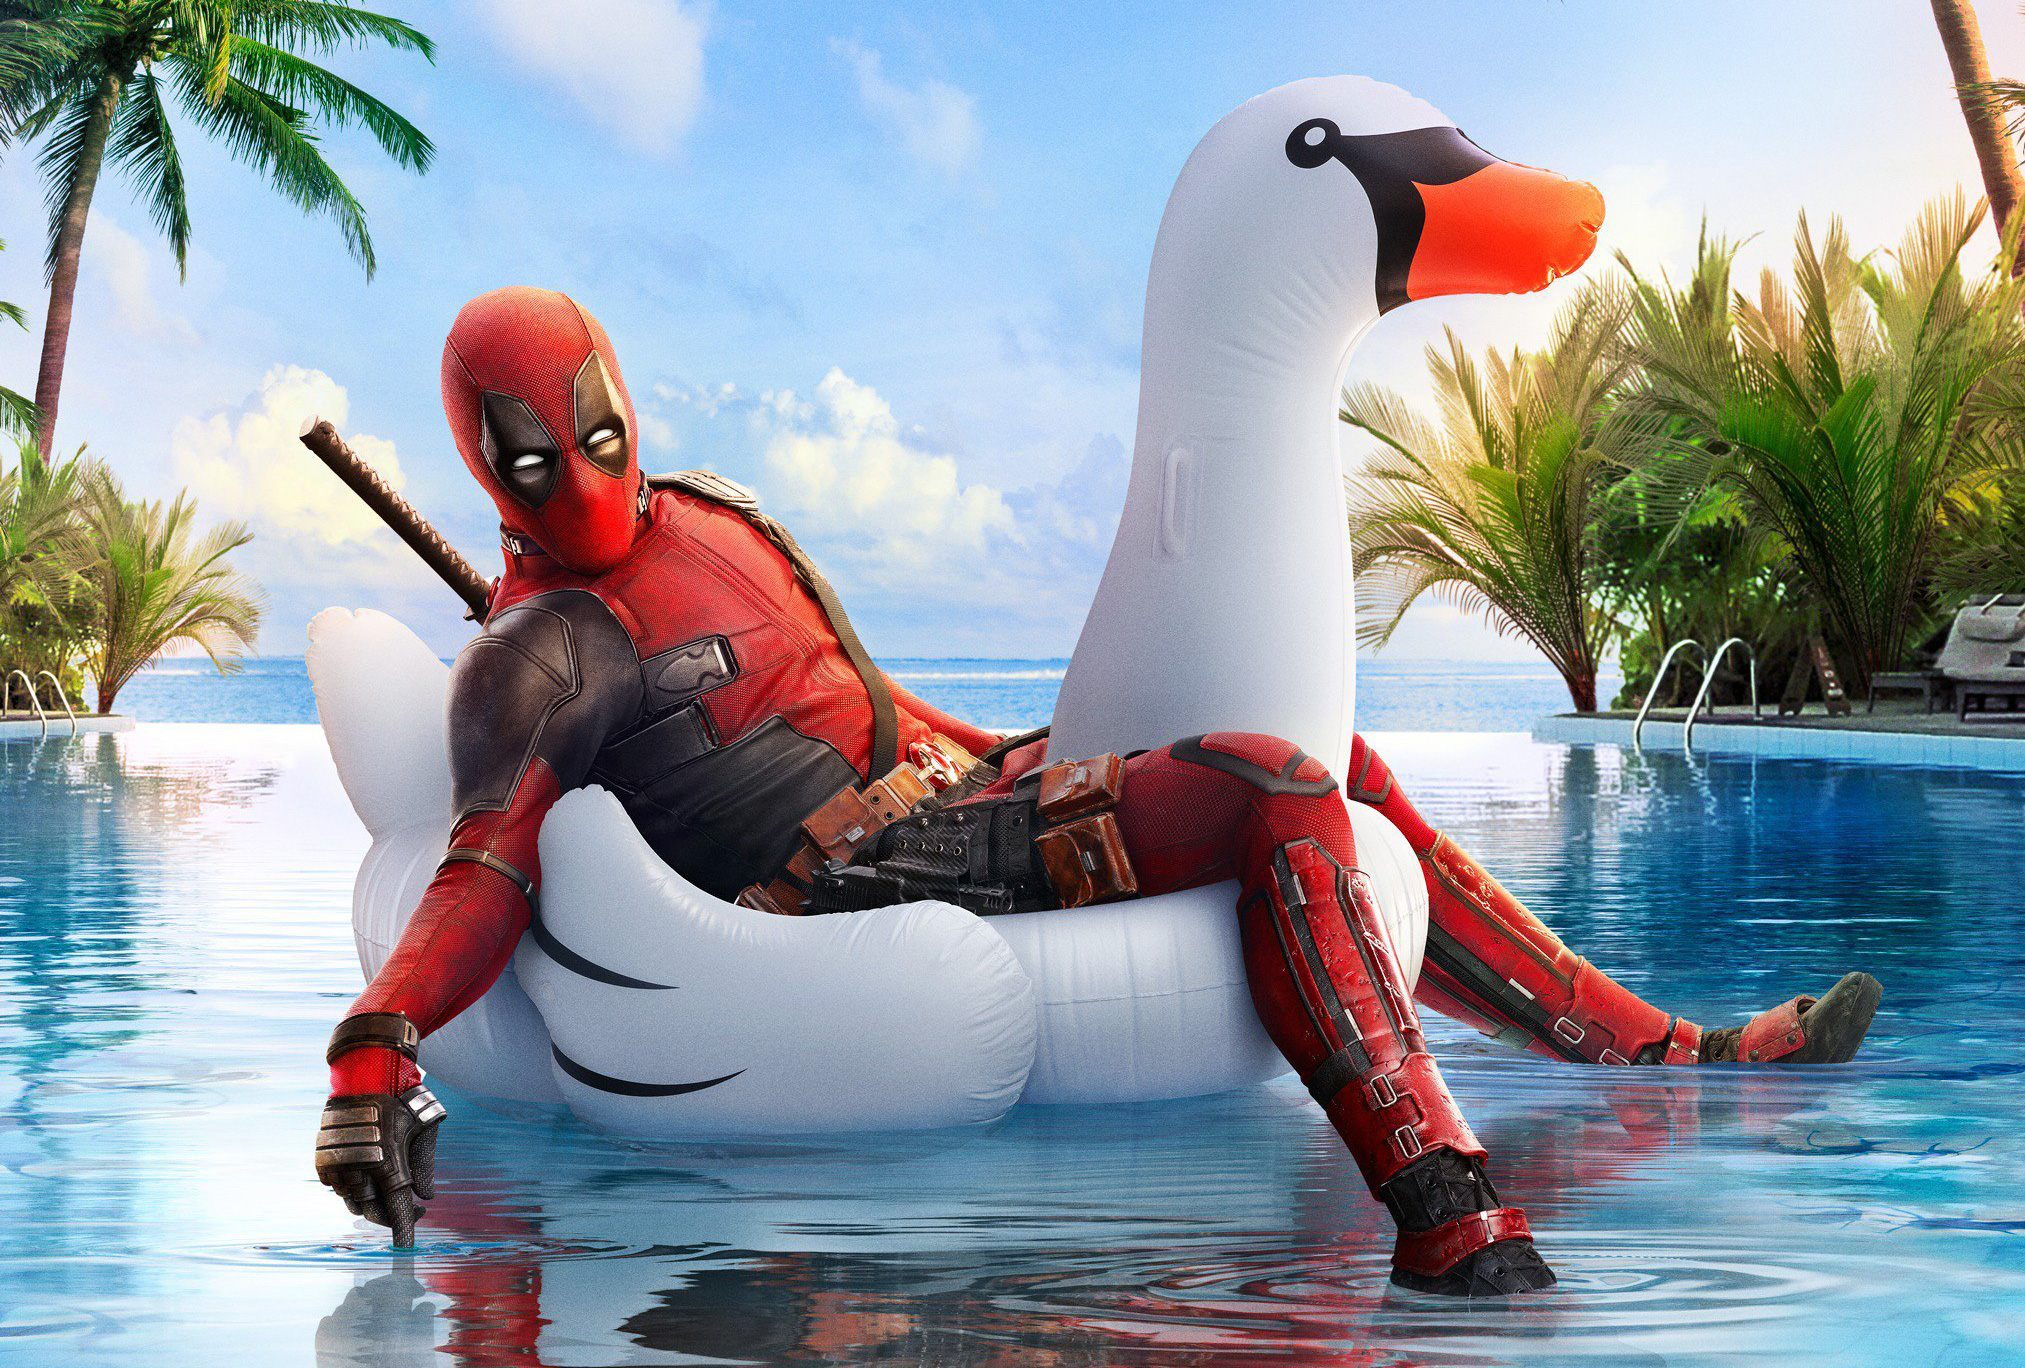 Free photo DeadPool 2 rides an inflatable swan in the pool